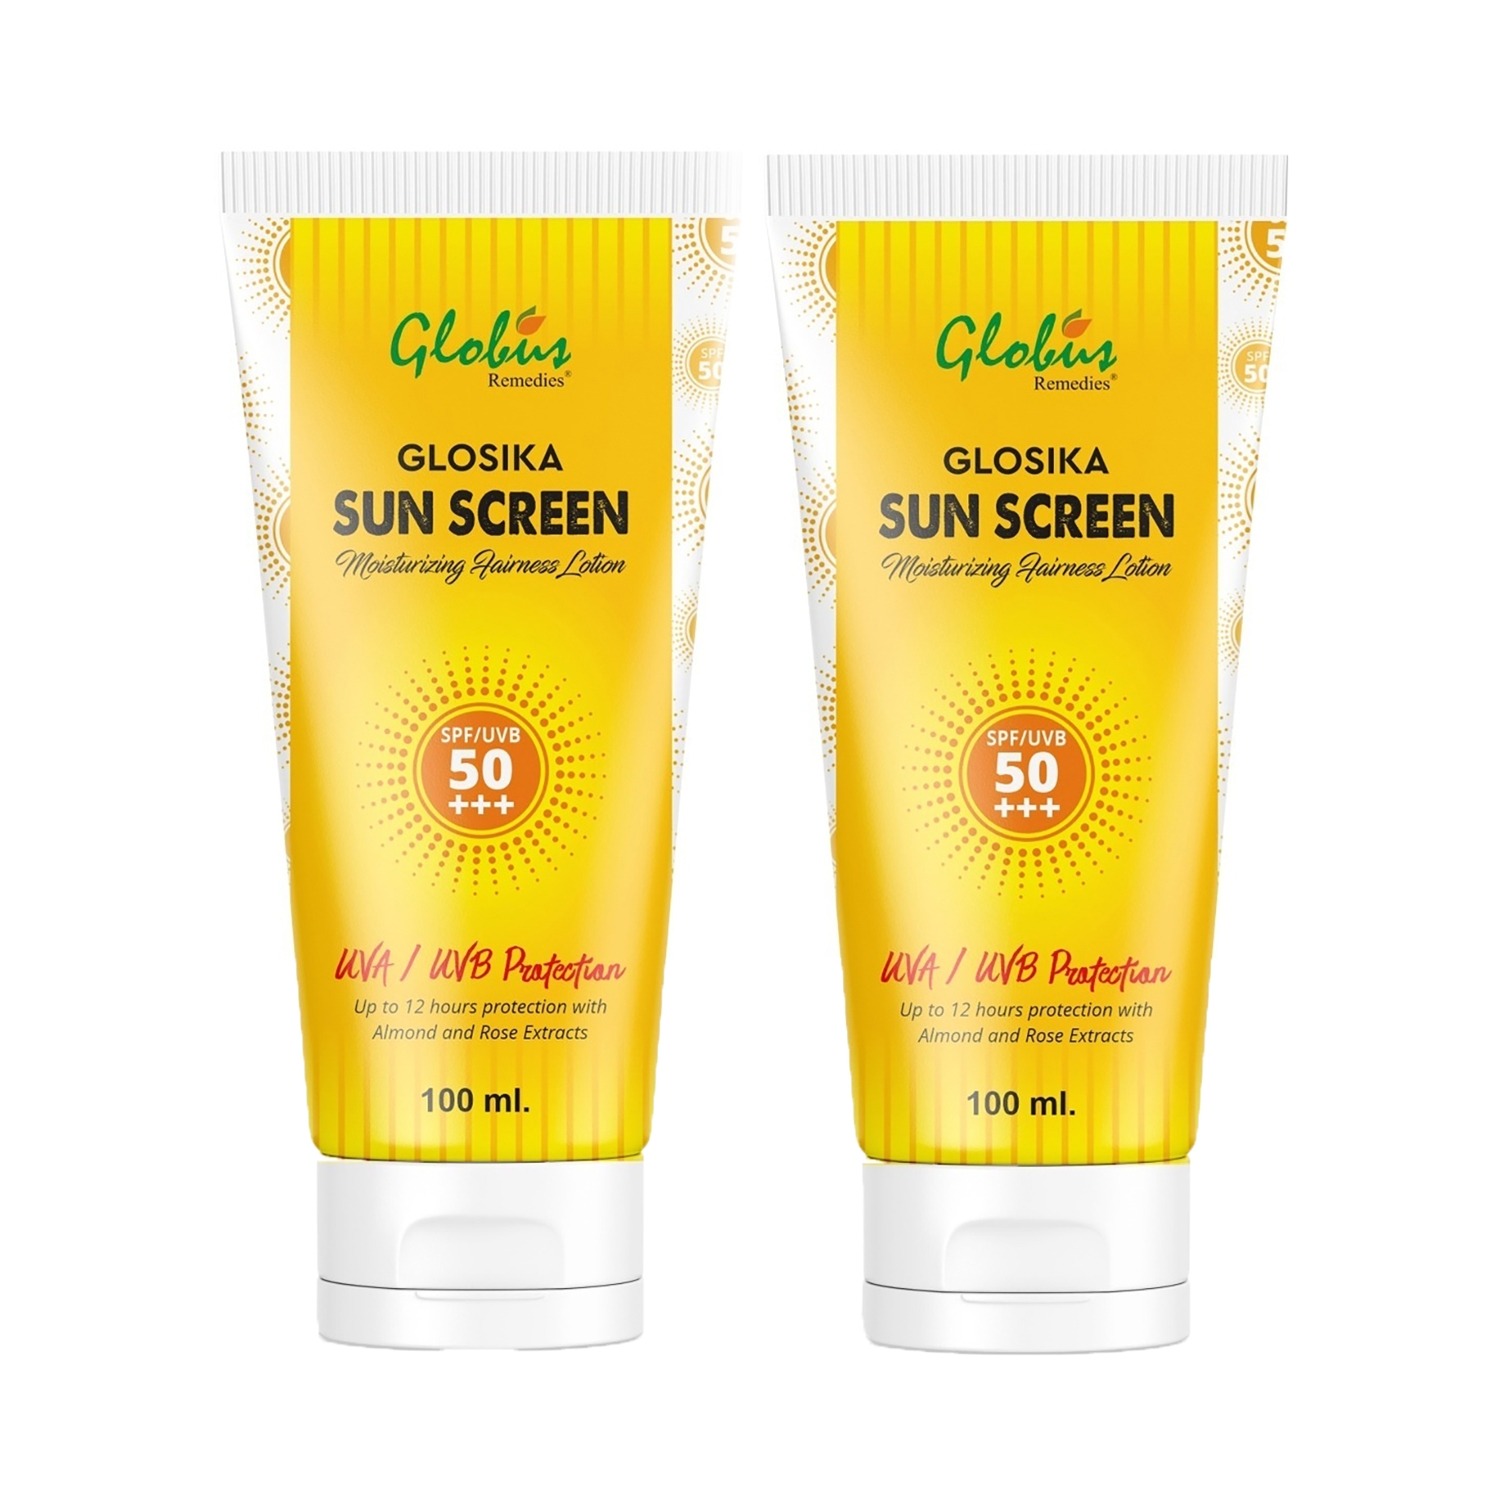 Globus Remedies | Globus Remedies Sunscreen Lotion SPF 50 Up To 12 Hr Protection With Almond & Rose Extract Combo (2pc)